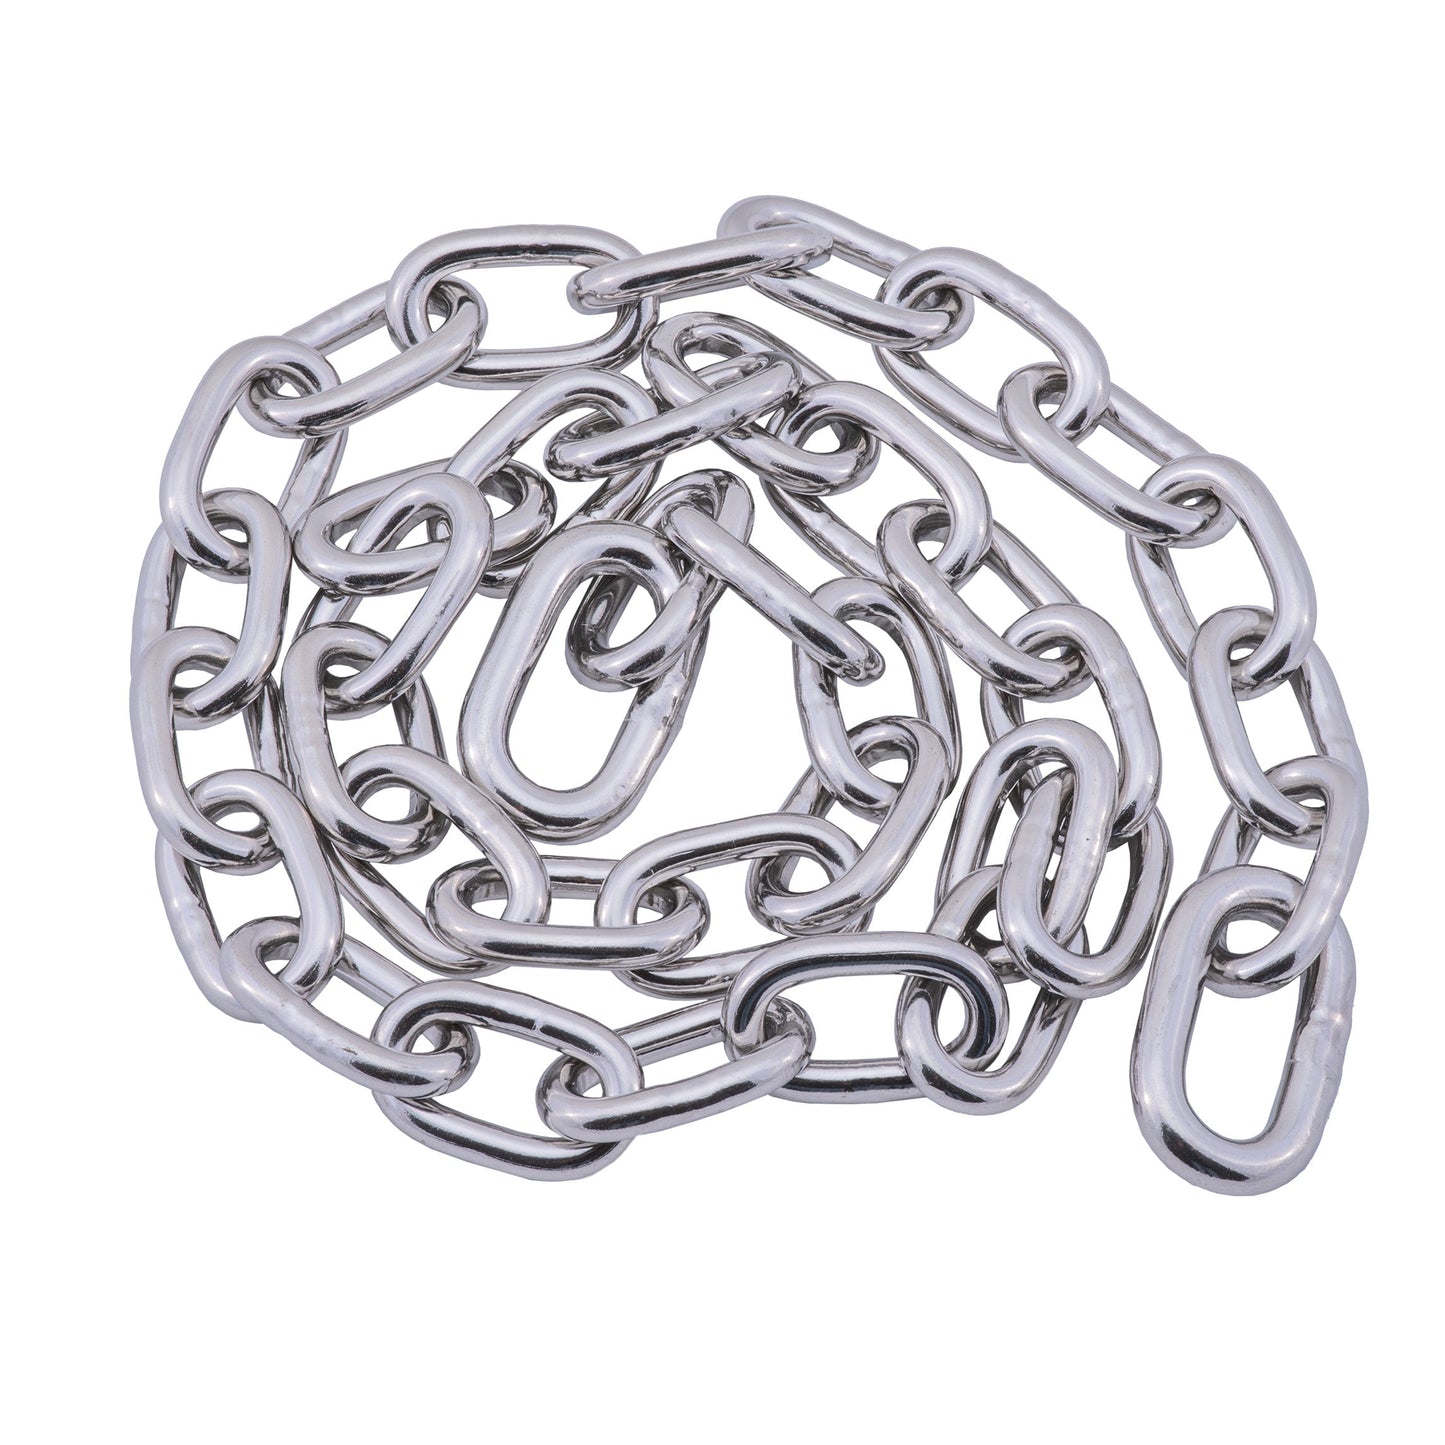 5' 316 Stainless Steel Anchor Chain